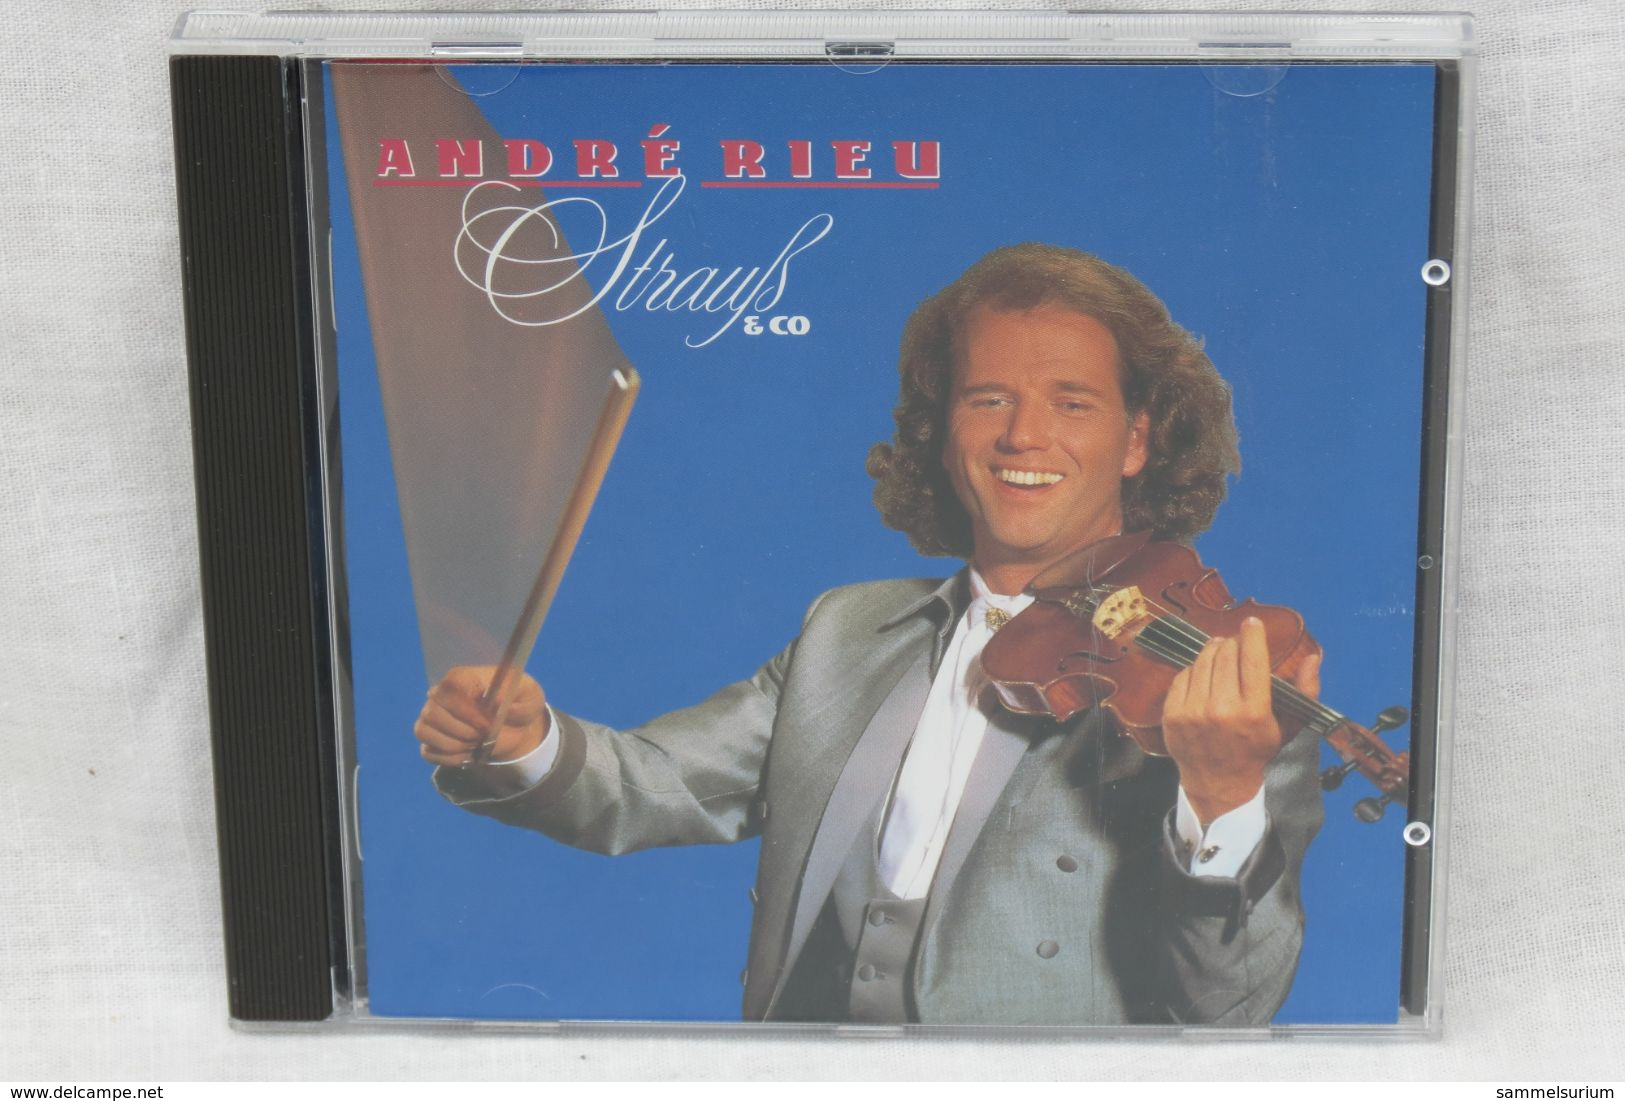 CD "André Rieu" Strauß & Co. - Instrumentaal